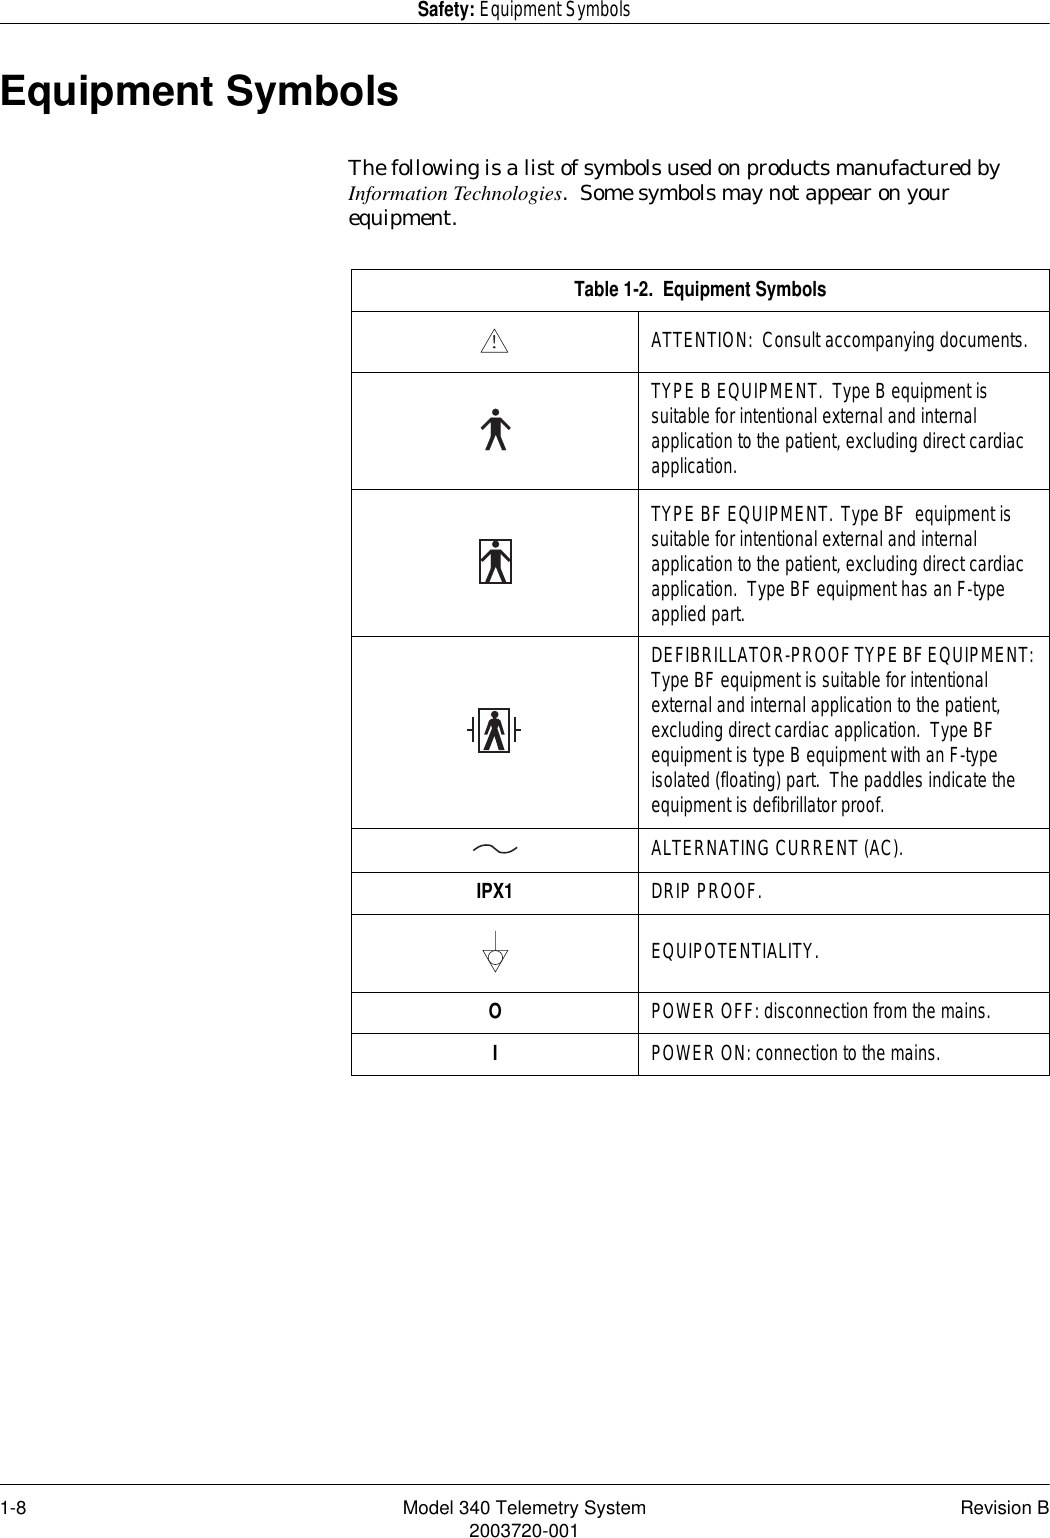 1-8 Model 340 Telemetry System Revision B2003720-001Safety: Equipment SymbolsEquipment SymbolsThe following is a list of symbols used on products manufactured by Information Technologies.  Some symbols may not appear on your equipment.Table 1-2.  Equipment SymbolsATTENTION:  Consult accompanying documents.TYPE B EQUIPMENT.  Type B equipment is suitable for intentional external and internal application to the patient, excluding direct cardiac application.TYPE BF EQUIPMENT.  Type BF  equipment is suitable for intentional external and internal application to the patient, excluding direct cardiac application.  Type BF equipment has an F-type applied part.DEFIBRILLATOR-PROOF TYPE BF EQUIPMENT: Type BF equipment is suitable for intentional external and internal application to the patient, excluding direct cardiac application.  Type BF equipment is type B equipment with an F-type isolated (floating) part.  The paddles indicate the equipment is defibrillator proof.ALTERNATING CURRENT (AC).IPX1 DRIP PROOF.EQUIPOTENTIALITY.OPOWER OFF: disconnection from the mains.IPOWER ON: connection to the mains.!